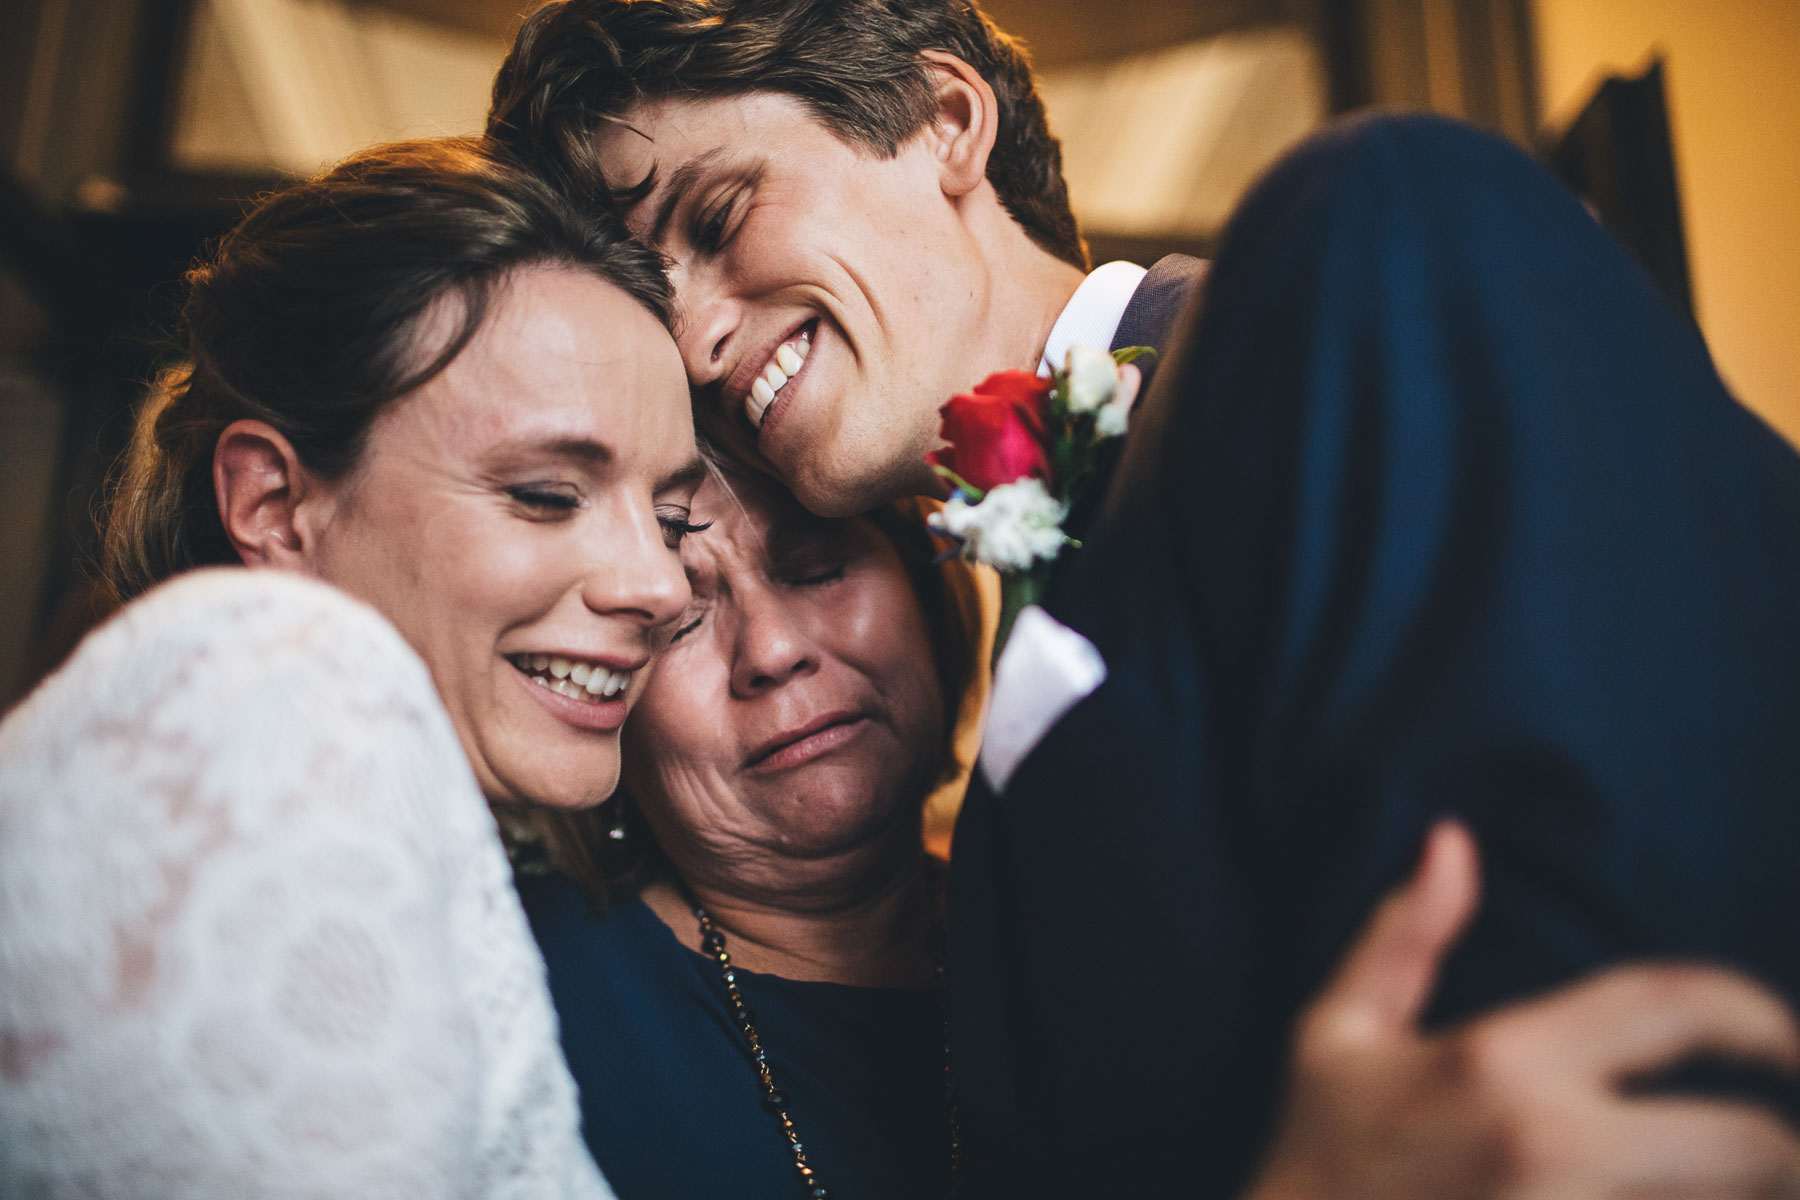 an emotional happy hug after the wedding ceremony